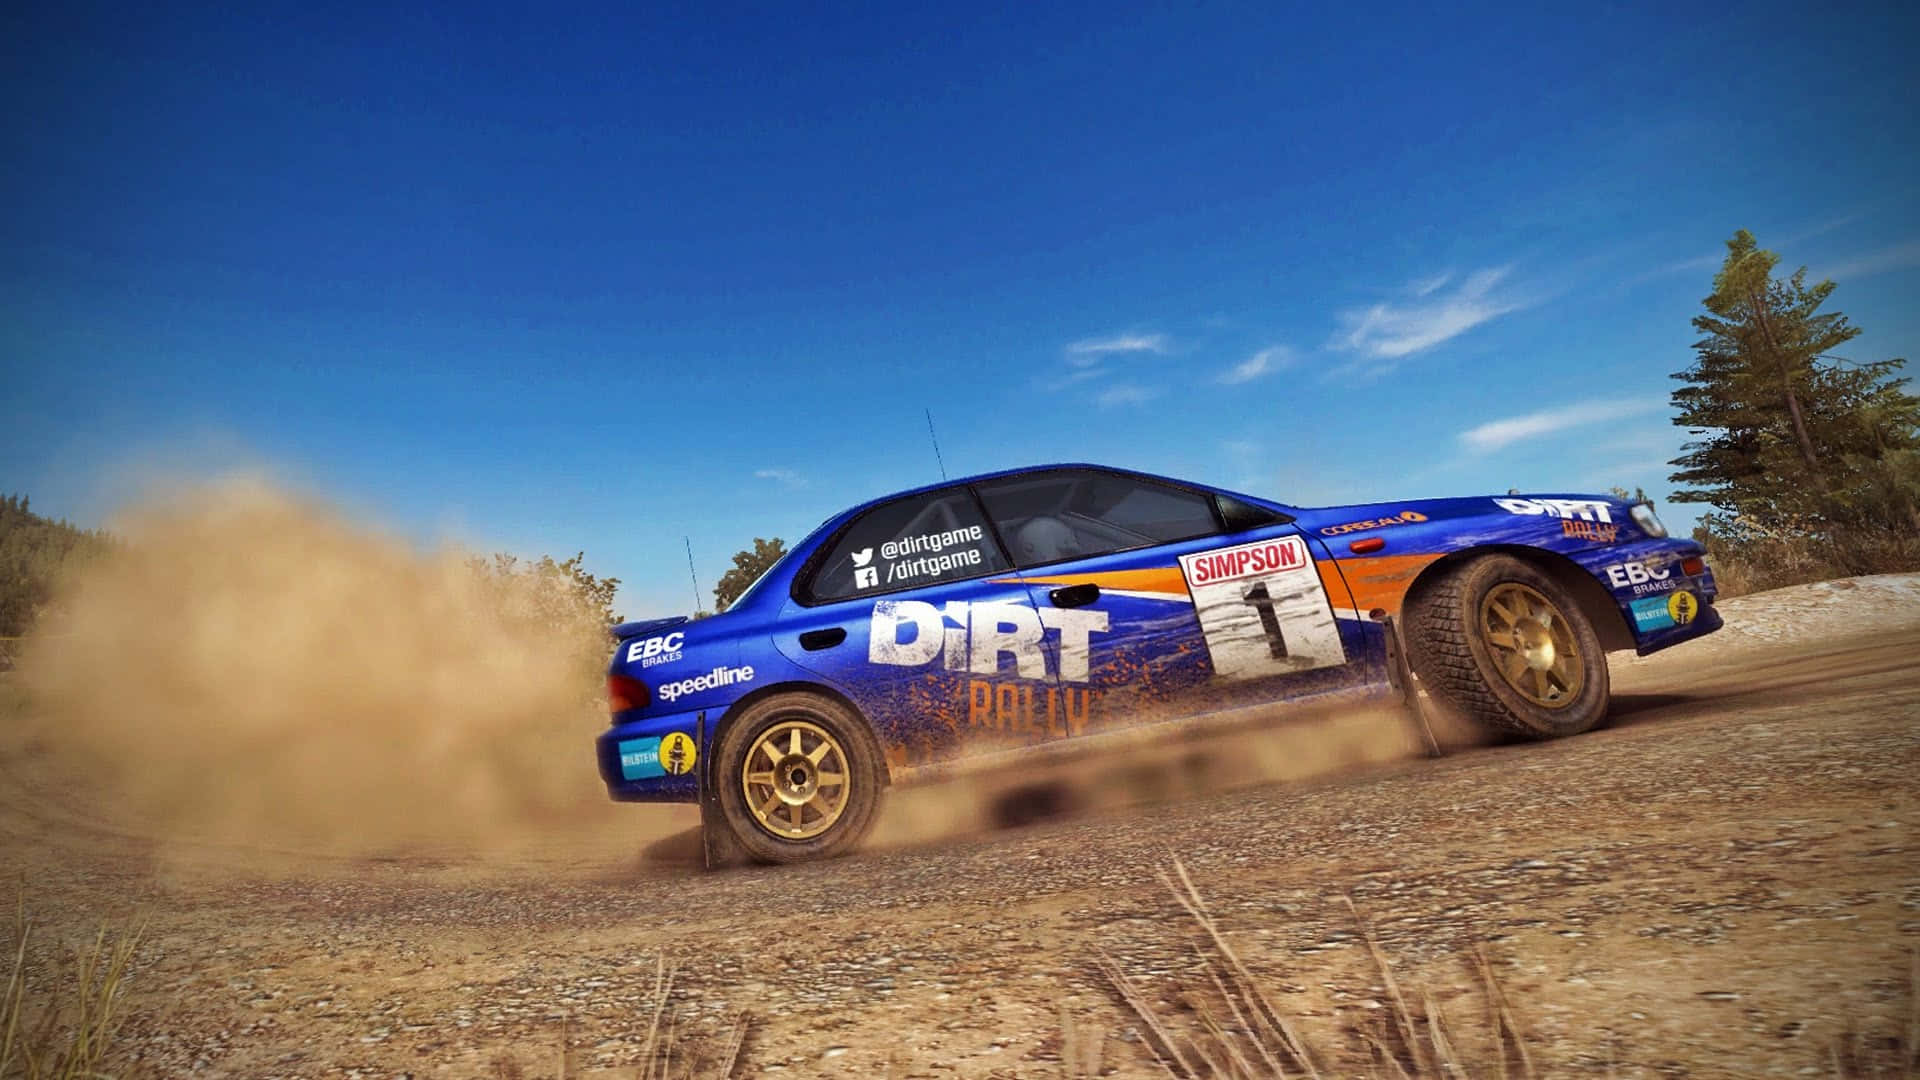 Accelerating Through Dirt Rally In Full HD